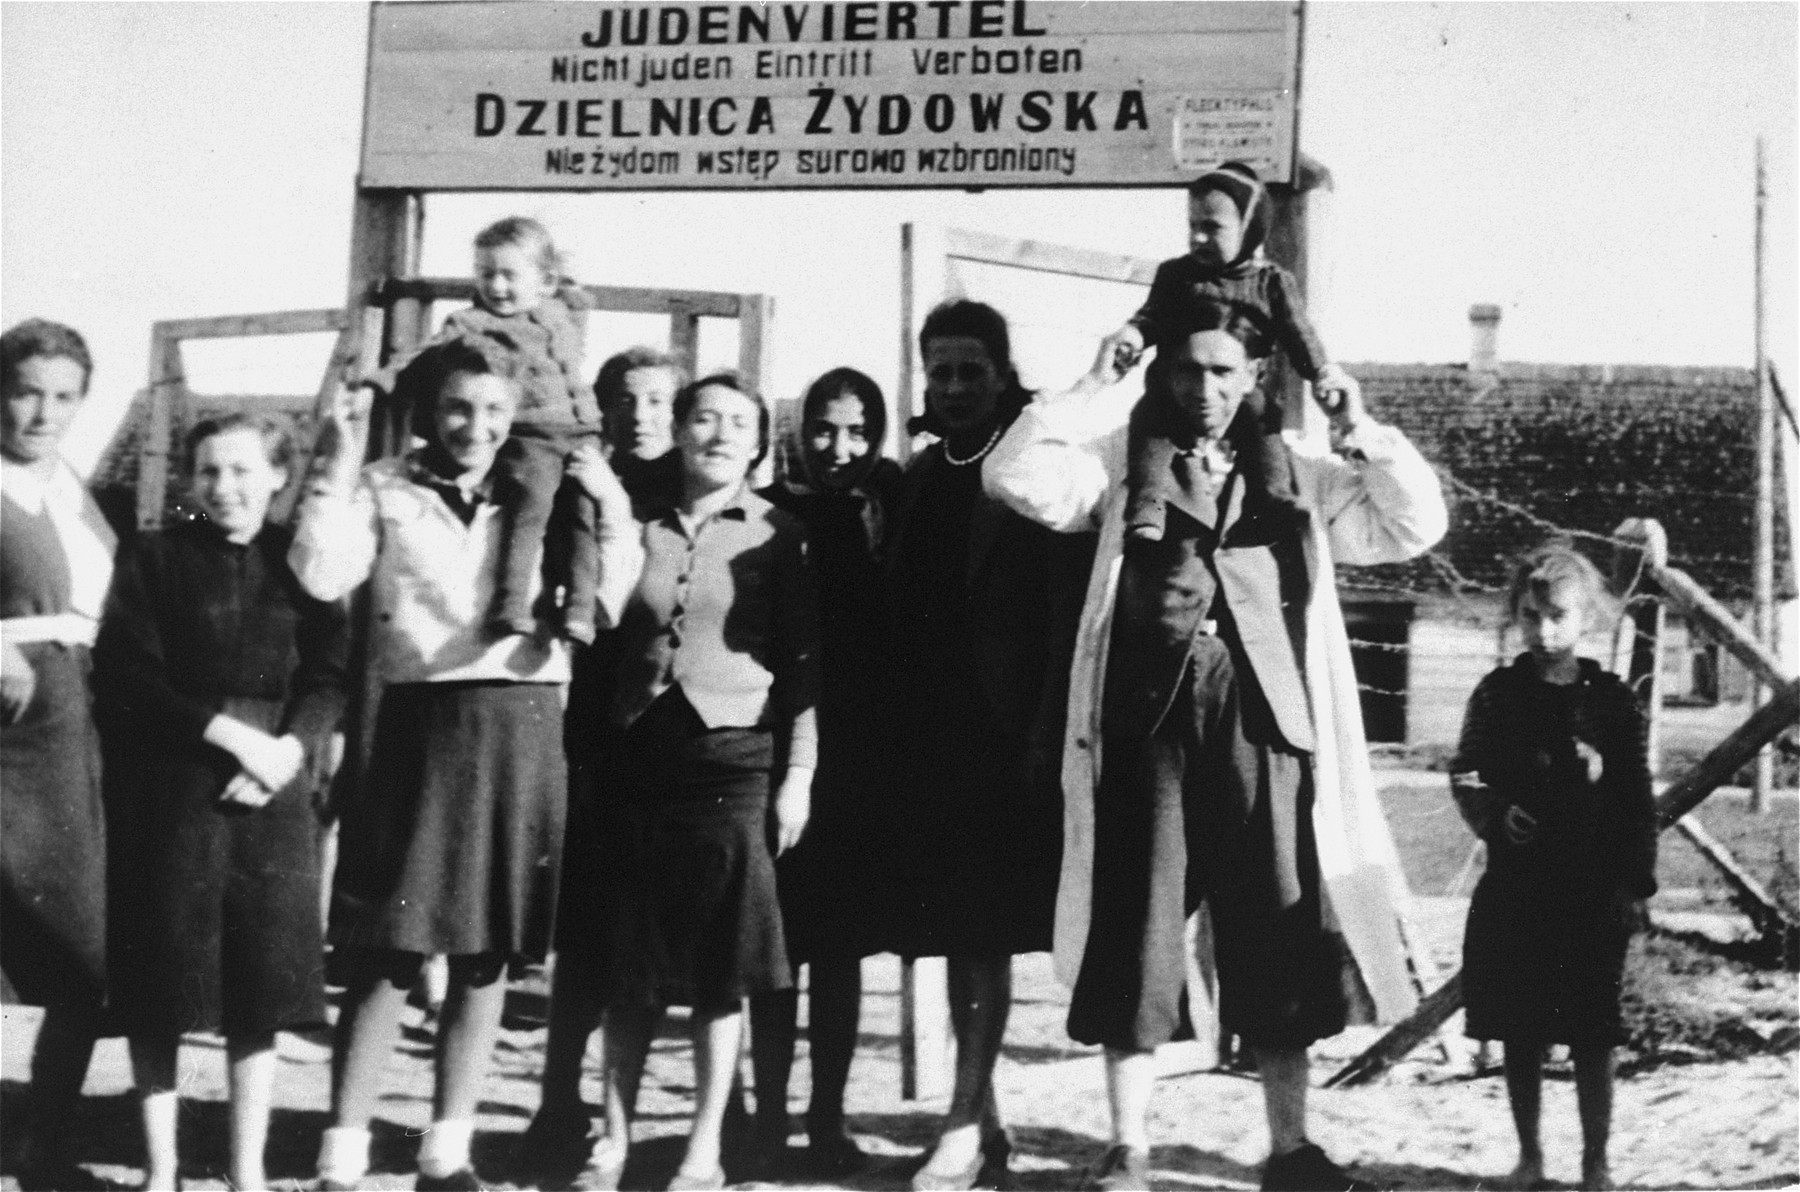 A group of Jews pose in front of the entrance to the Wisznice ghetto.  

The sign above the gate, translated from German and Polish, reads: "Jewish quarter, entrance to non-Jews is forbidden."